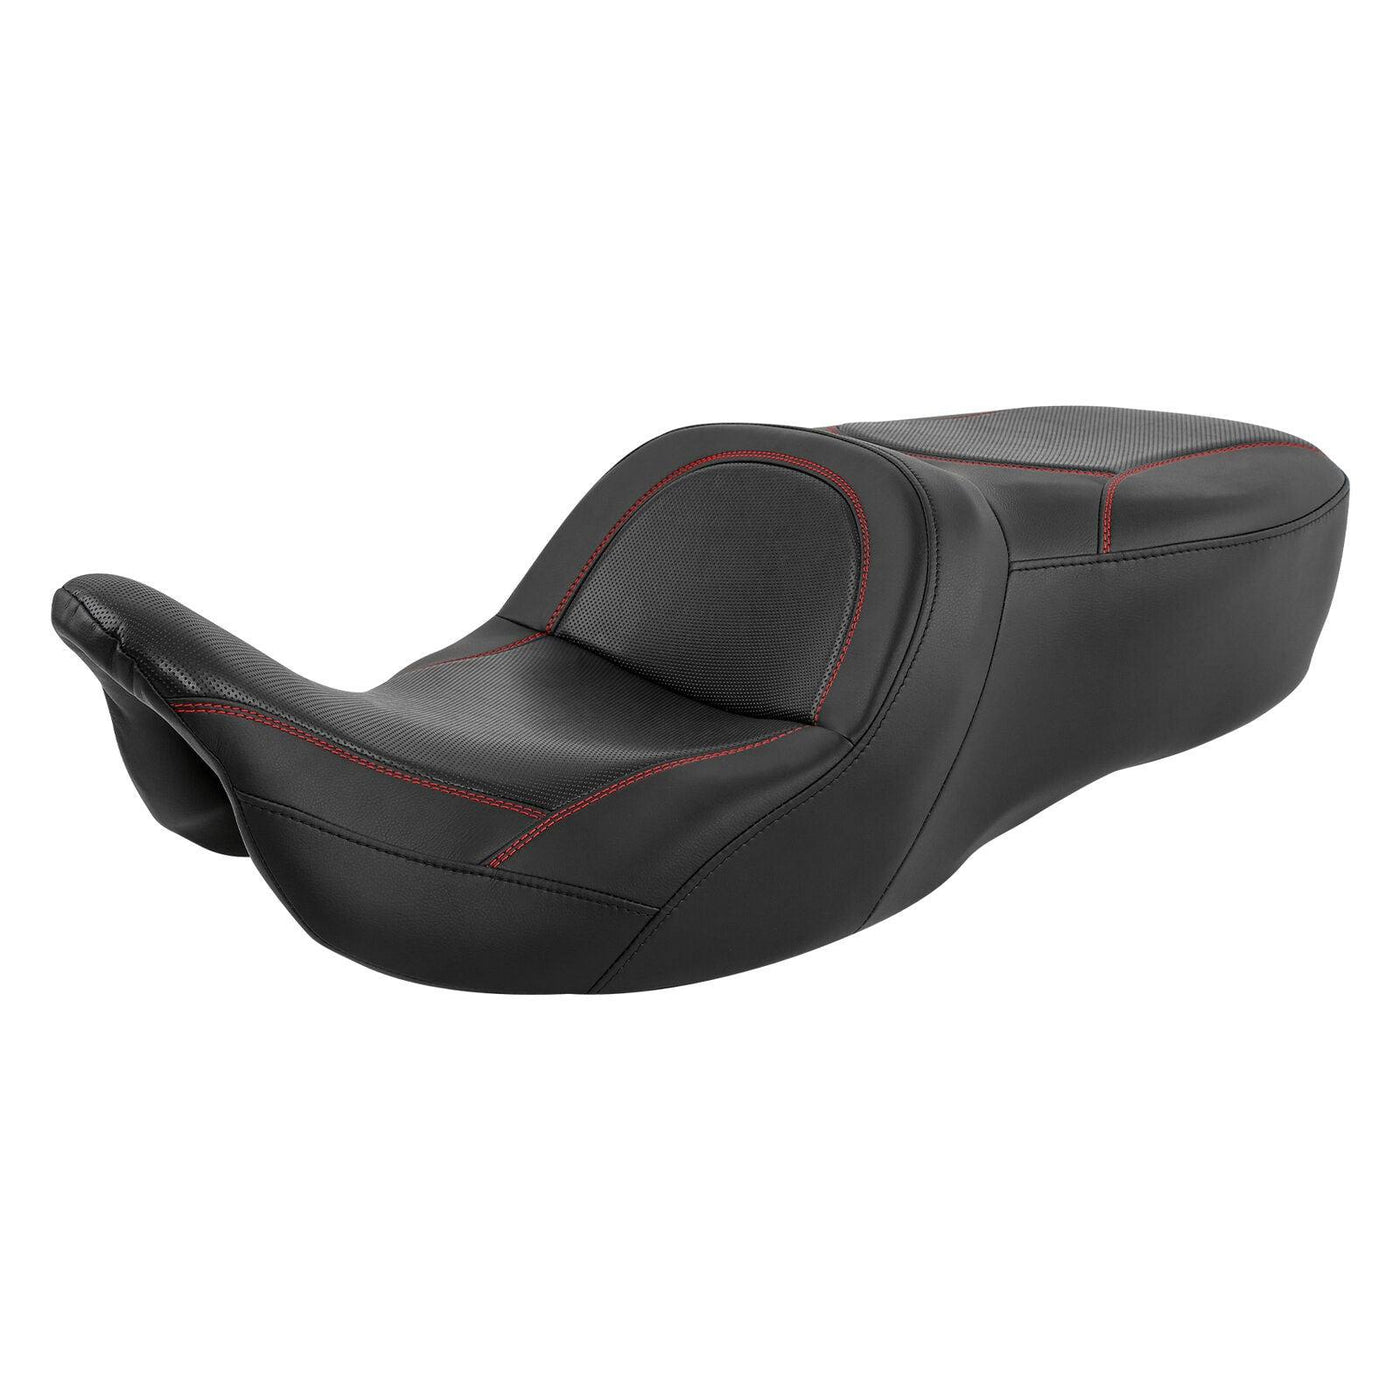 Rider Driver Passenger Seat Fit For Harley Touring Street Glide Road Glide 09-22 - Moto Life Products